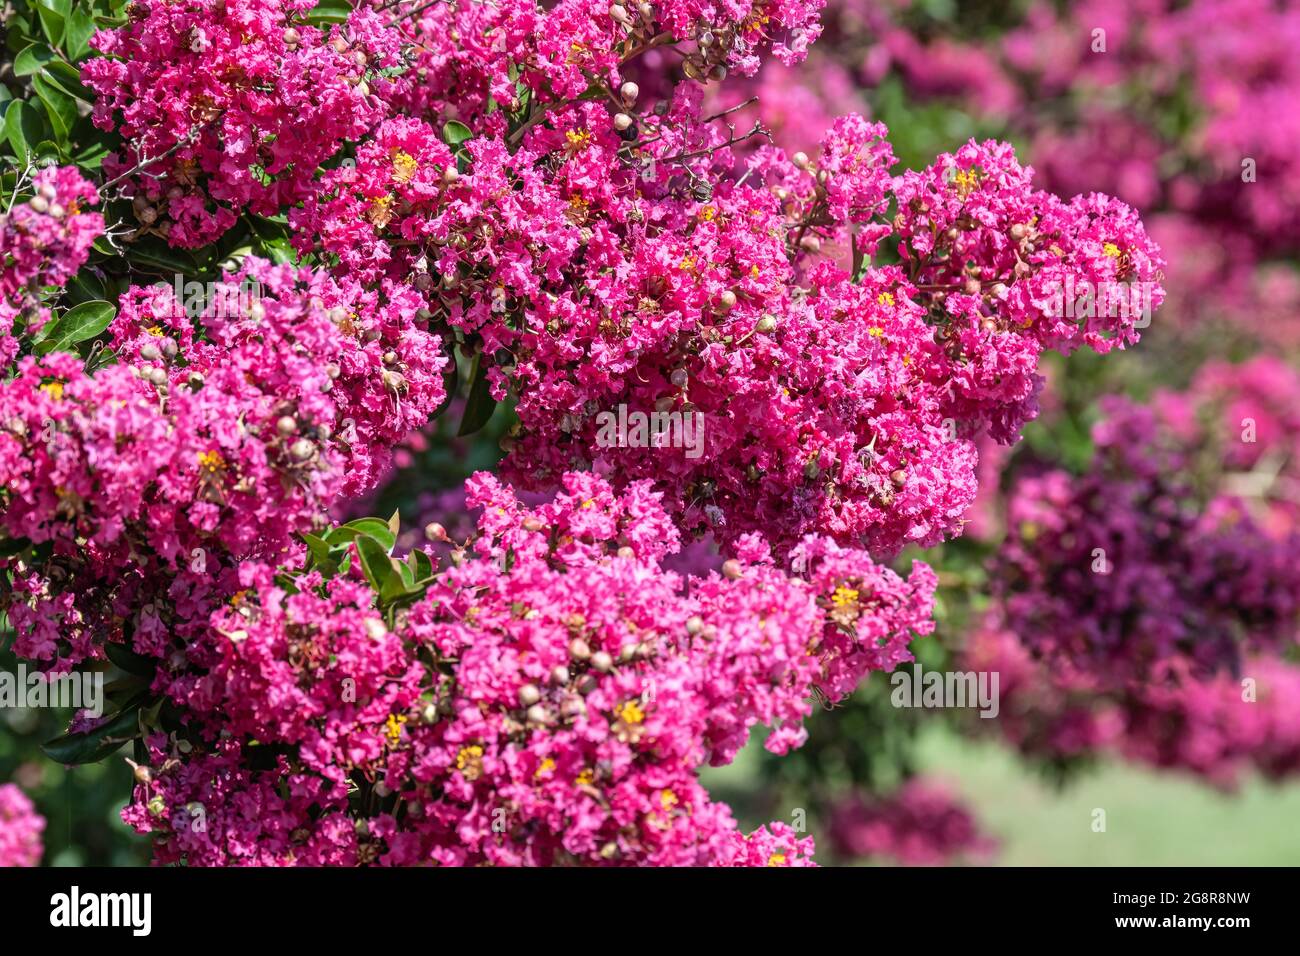 Beautiful pink blossoms on Crape Myrtle (Lagerstroemia) trees in Snellville, Georgia. (USA) Stock Photo